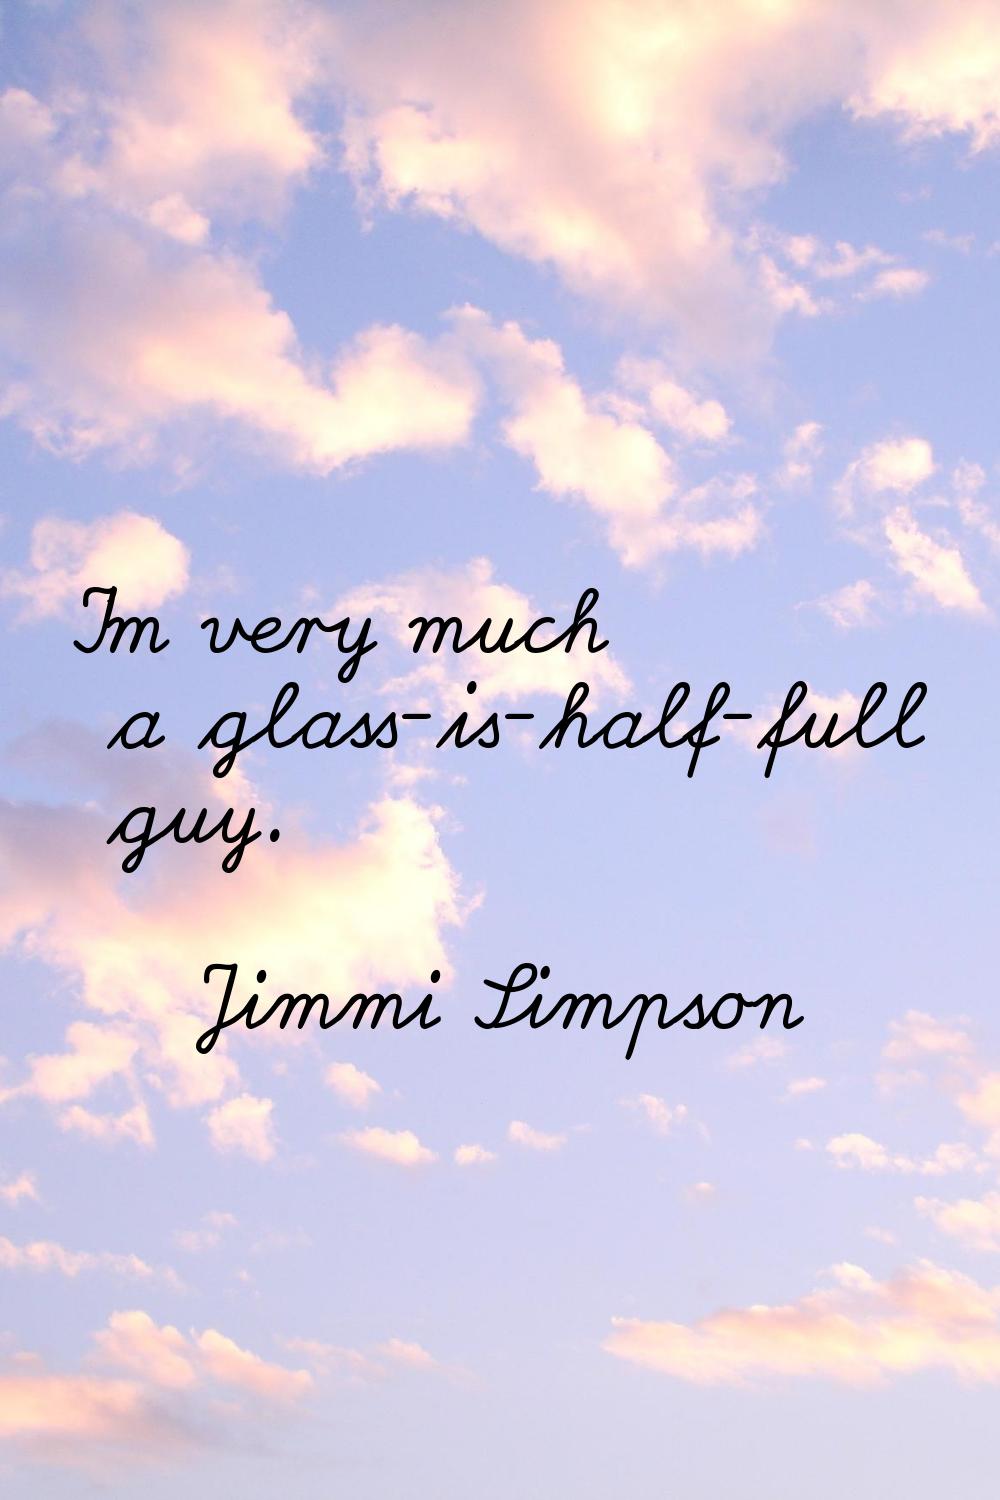 I'm very much a glass-is-half-full guy.